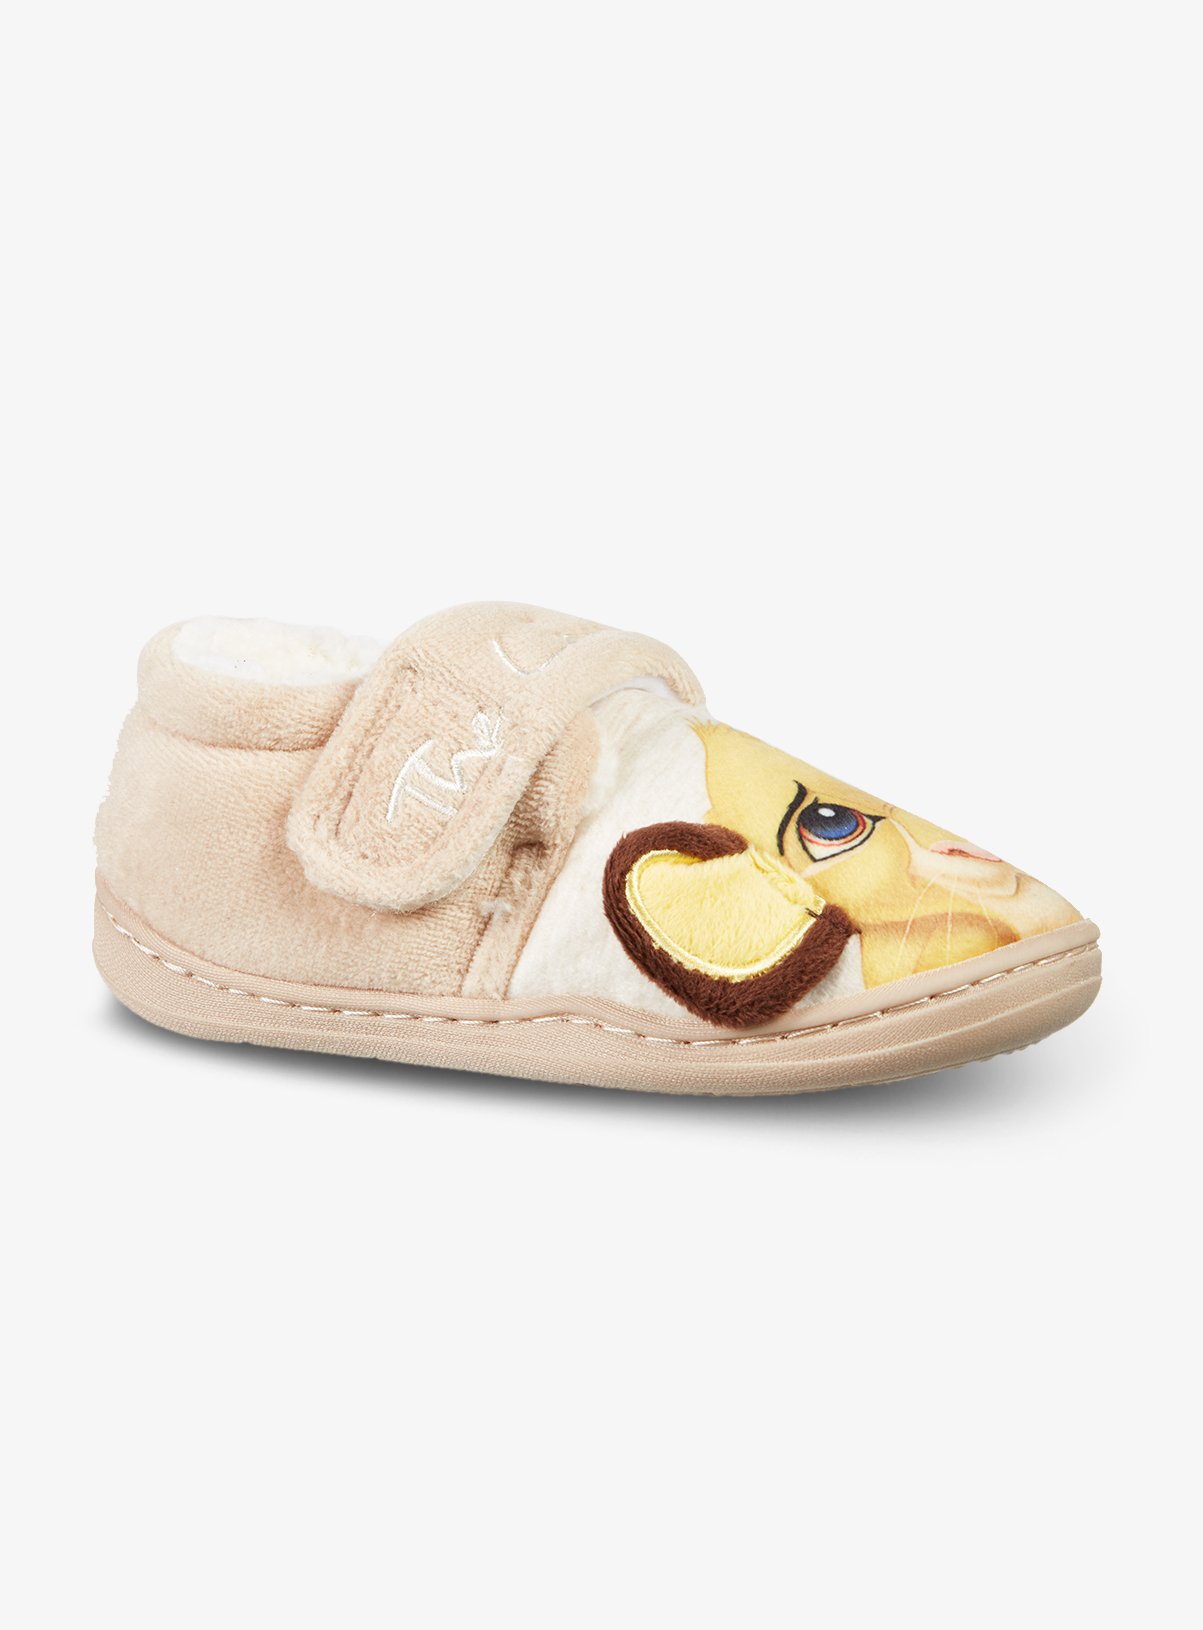 lion king slippers for adults